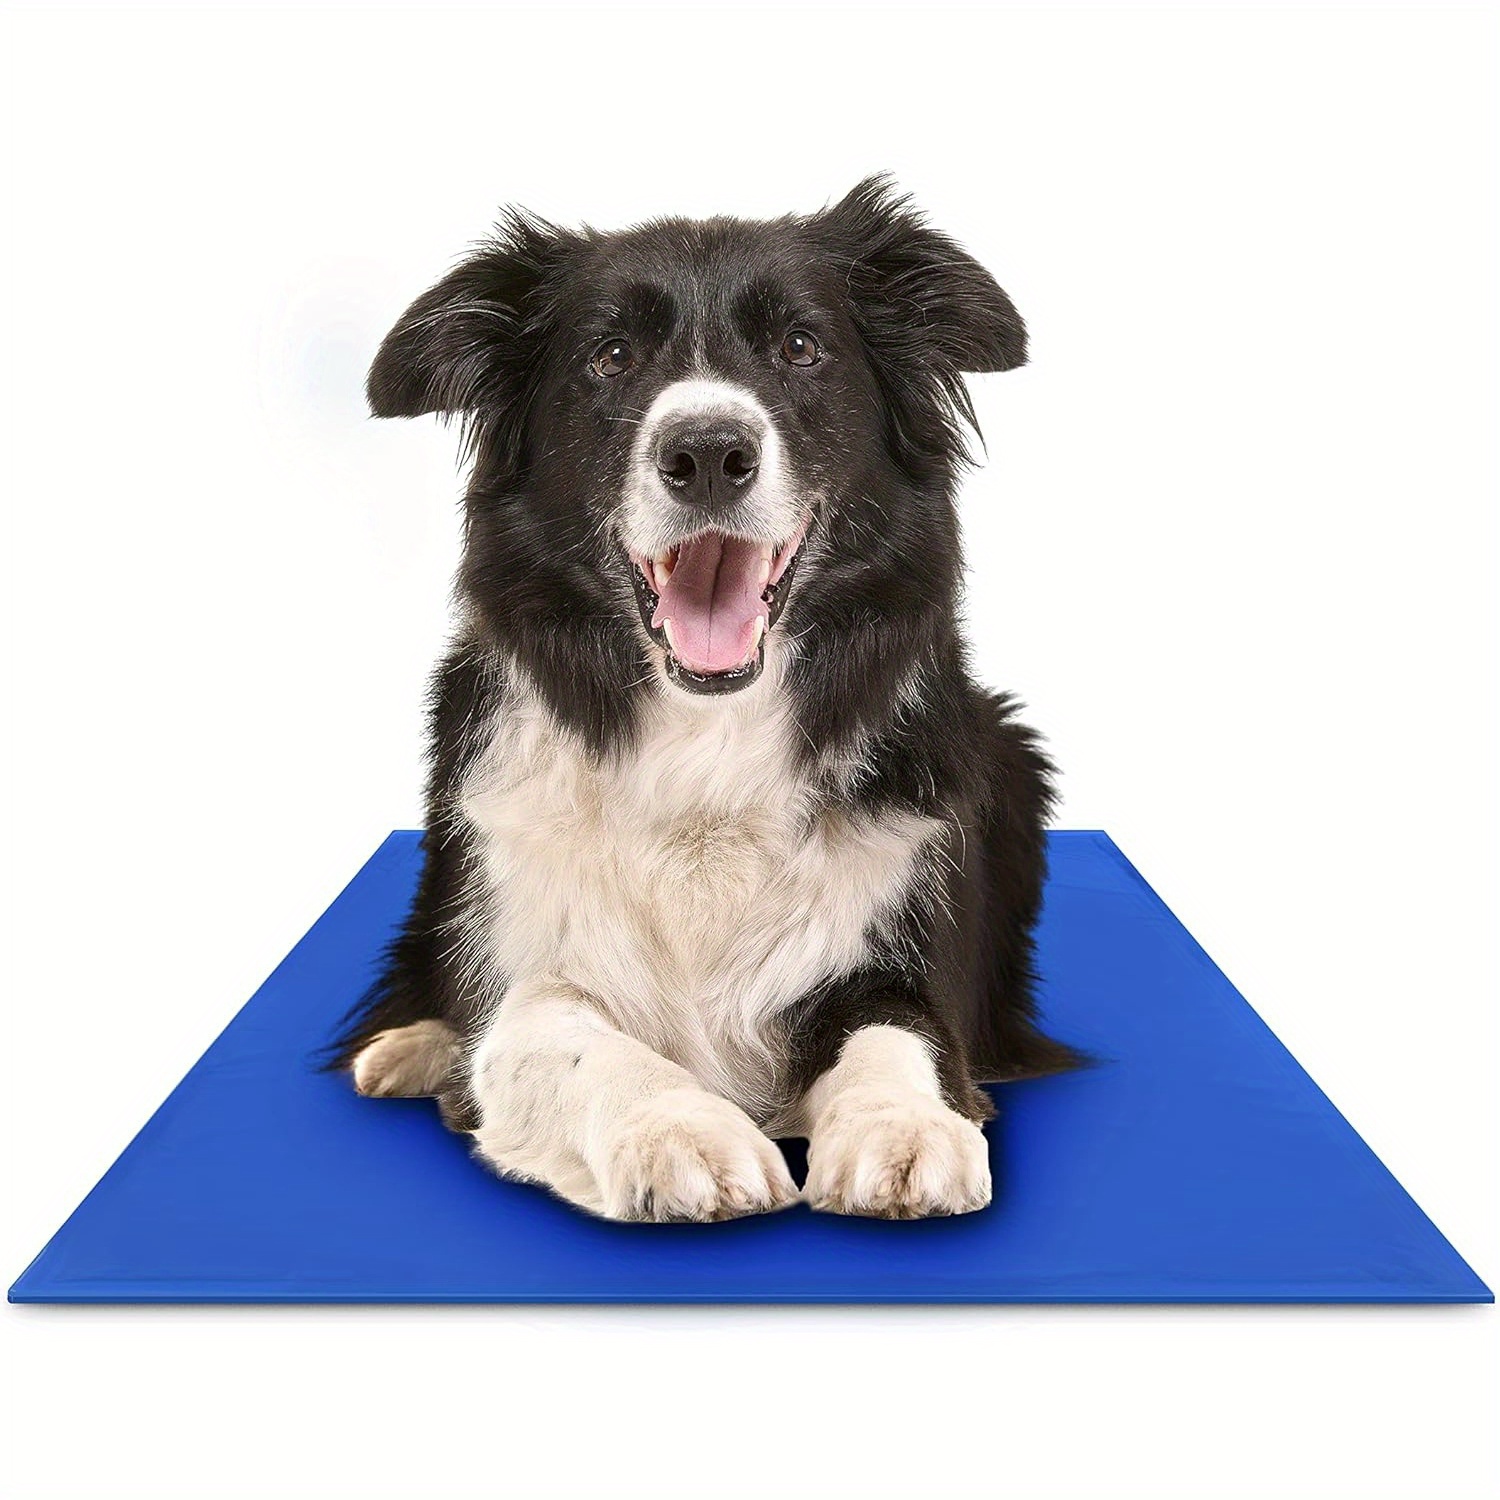 

Pressure-activated Dog Cooling Mat - Non-toxic Gel Pad For Pets, No Water Or Refrigeration Needed - Ideal For Home & Travel - Fits Small To Large Breeds - 36x20" / 19.5x15.7